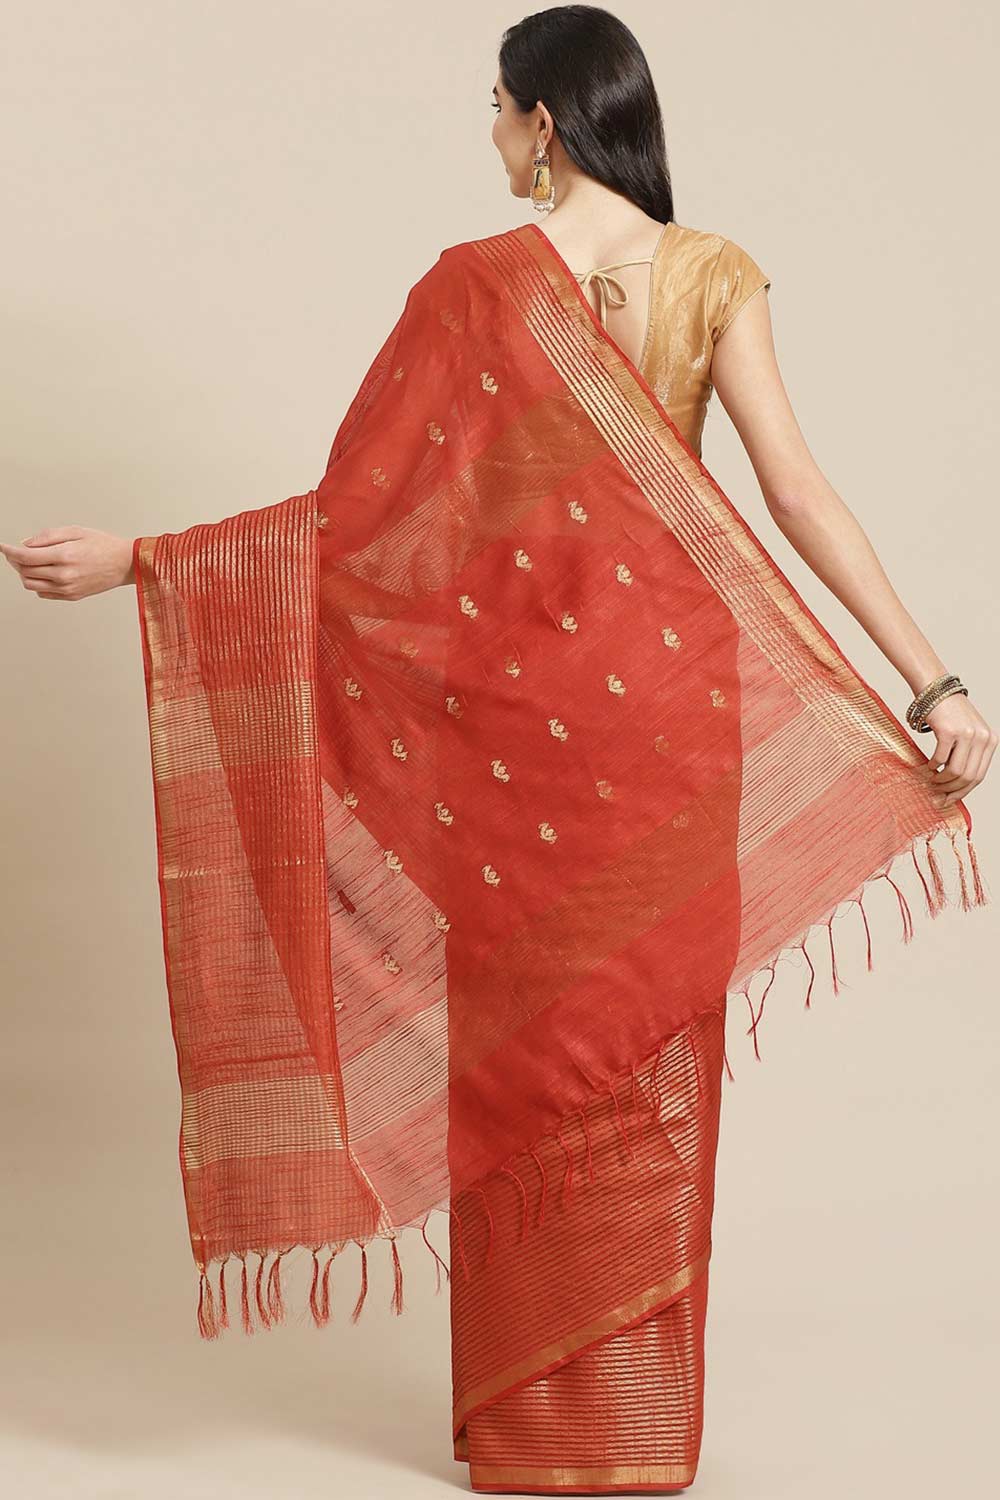 Shop Mansi Red Zari Woven Blended Silk One Minute Saree at best offer at our  Store - One Minute Saree